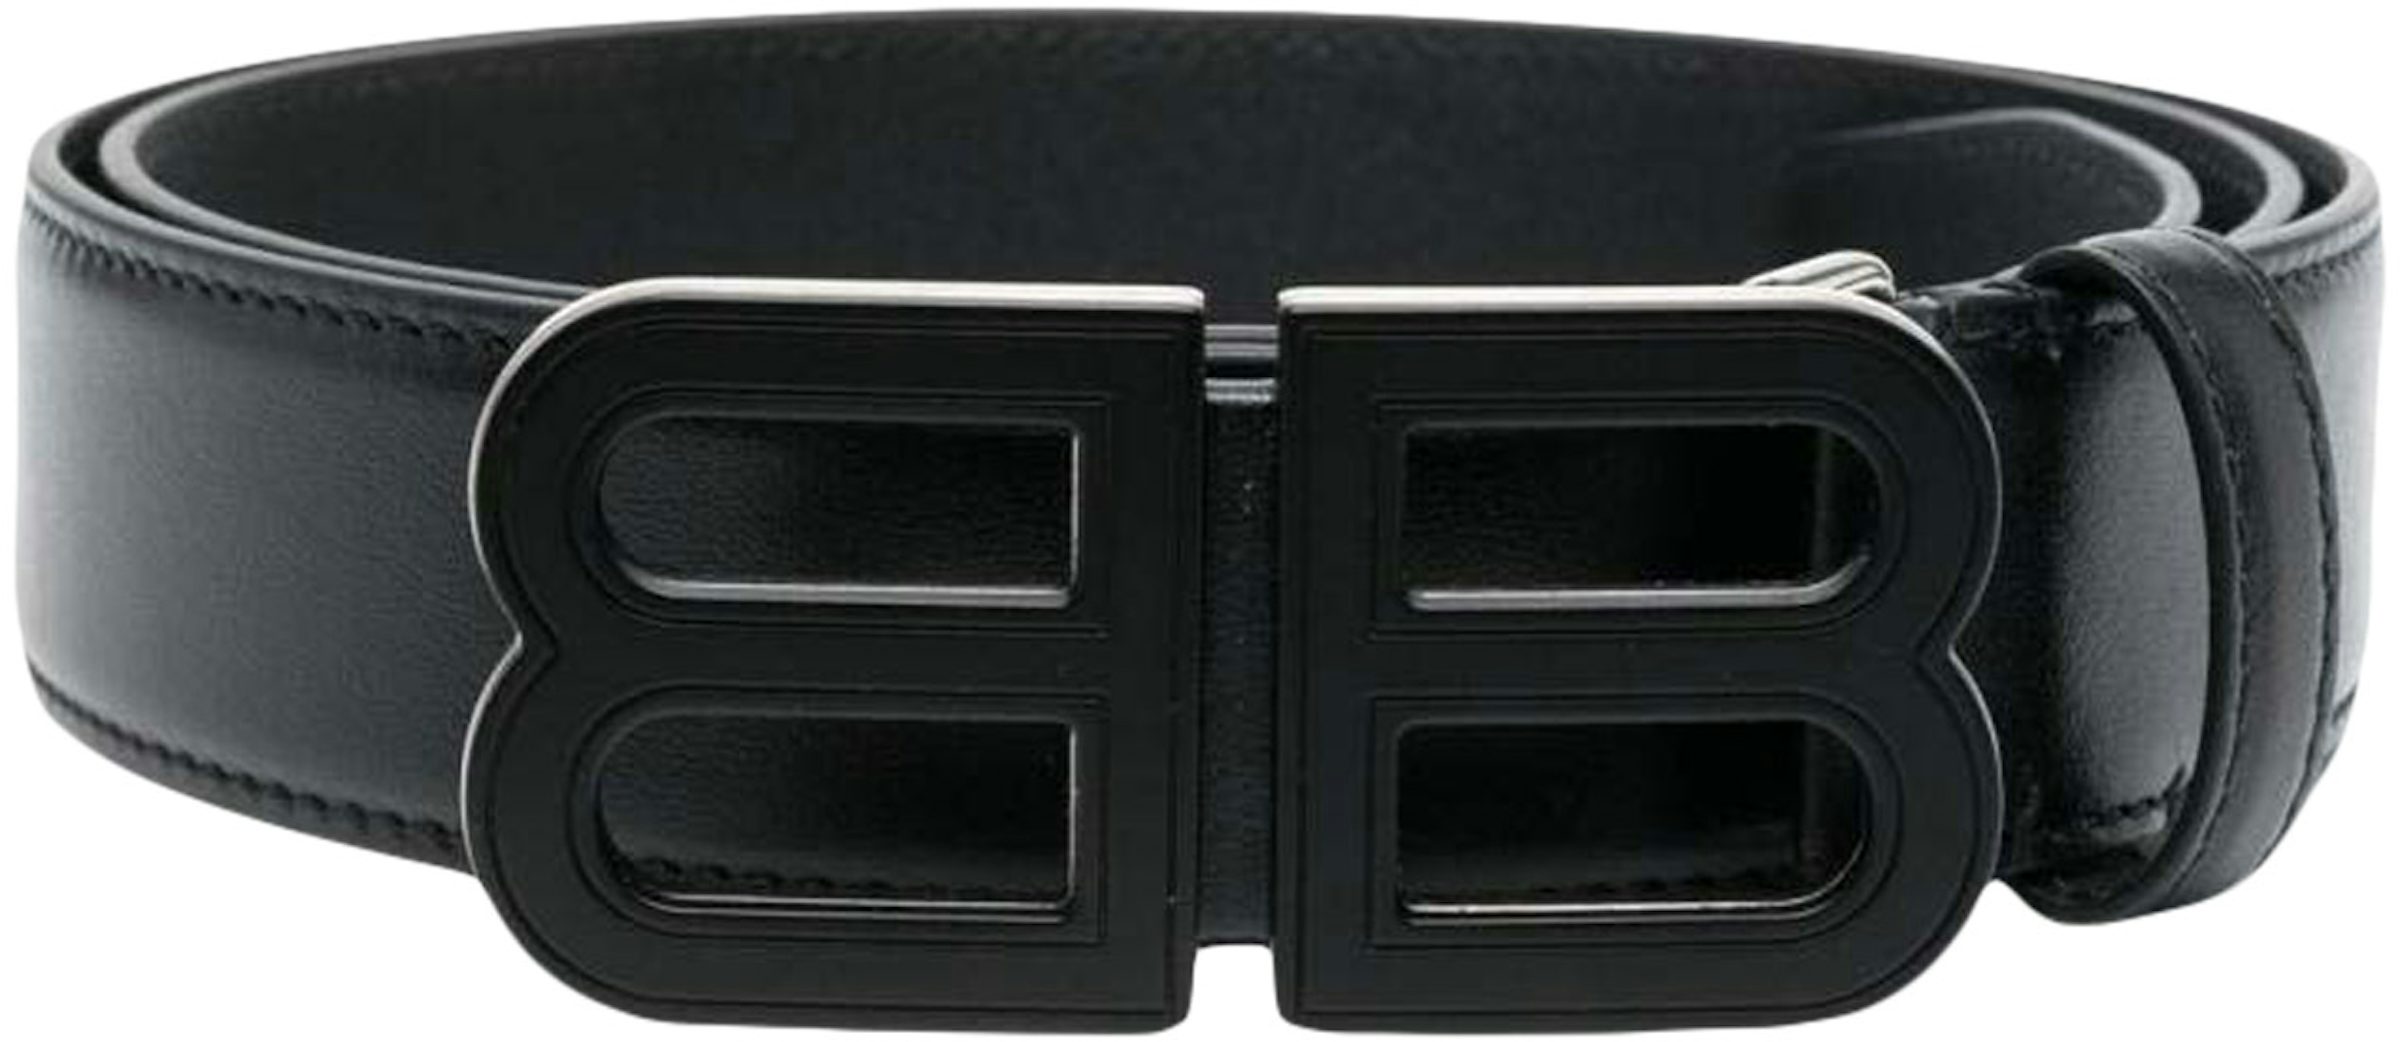 MCM Claus M Reversible Belt Monogram 1.75W 51In/130Cm Black in Leather with  Gold-tone - US